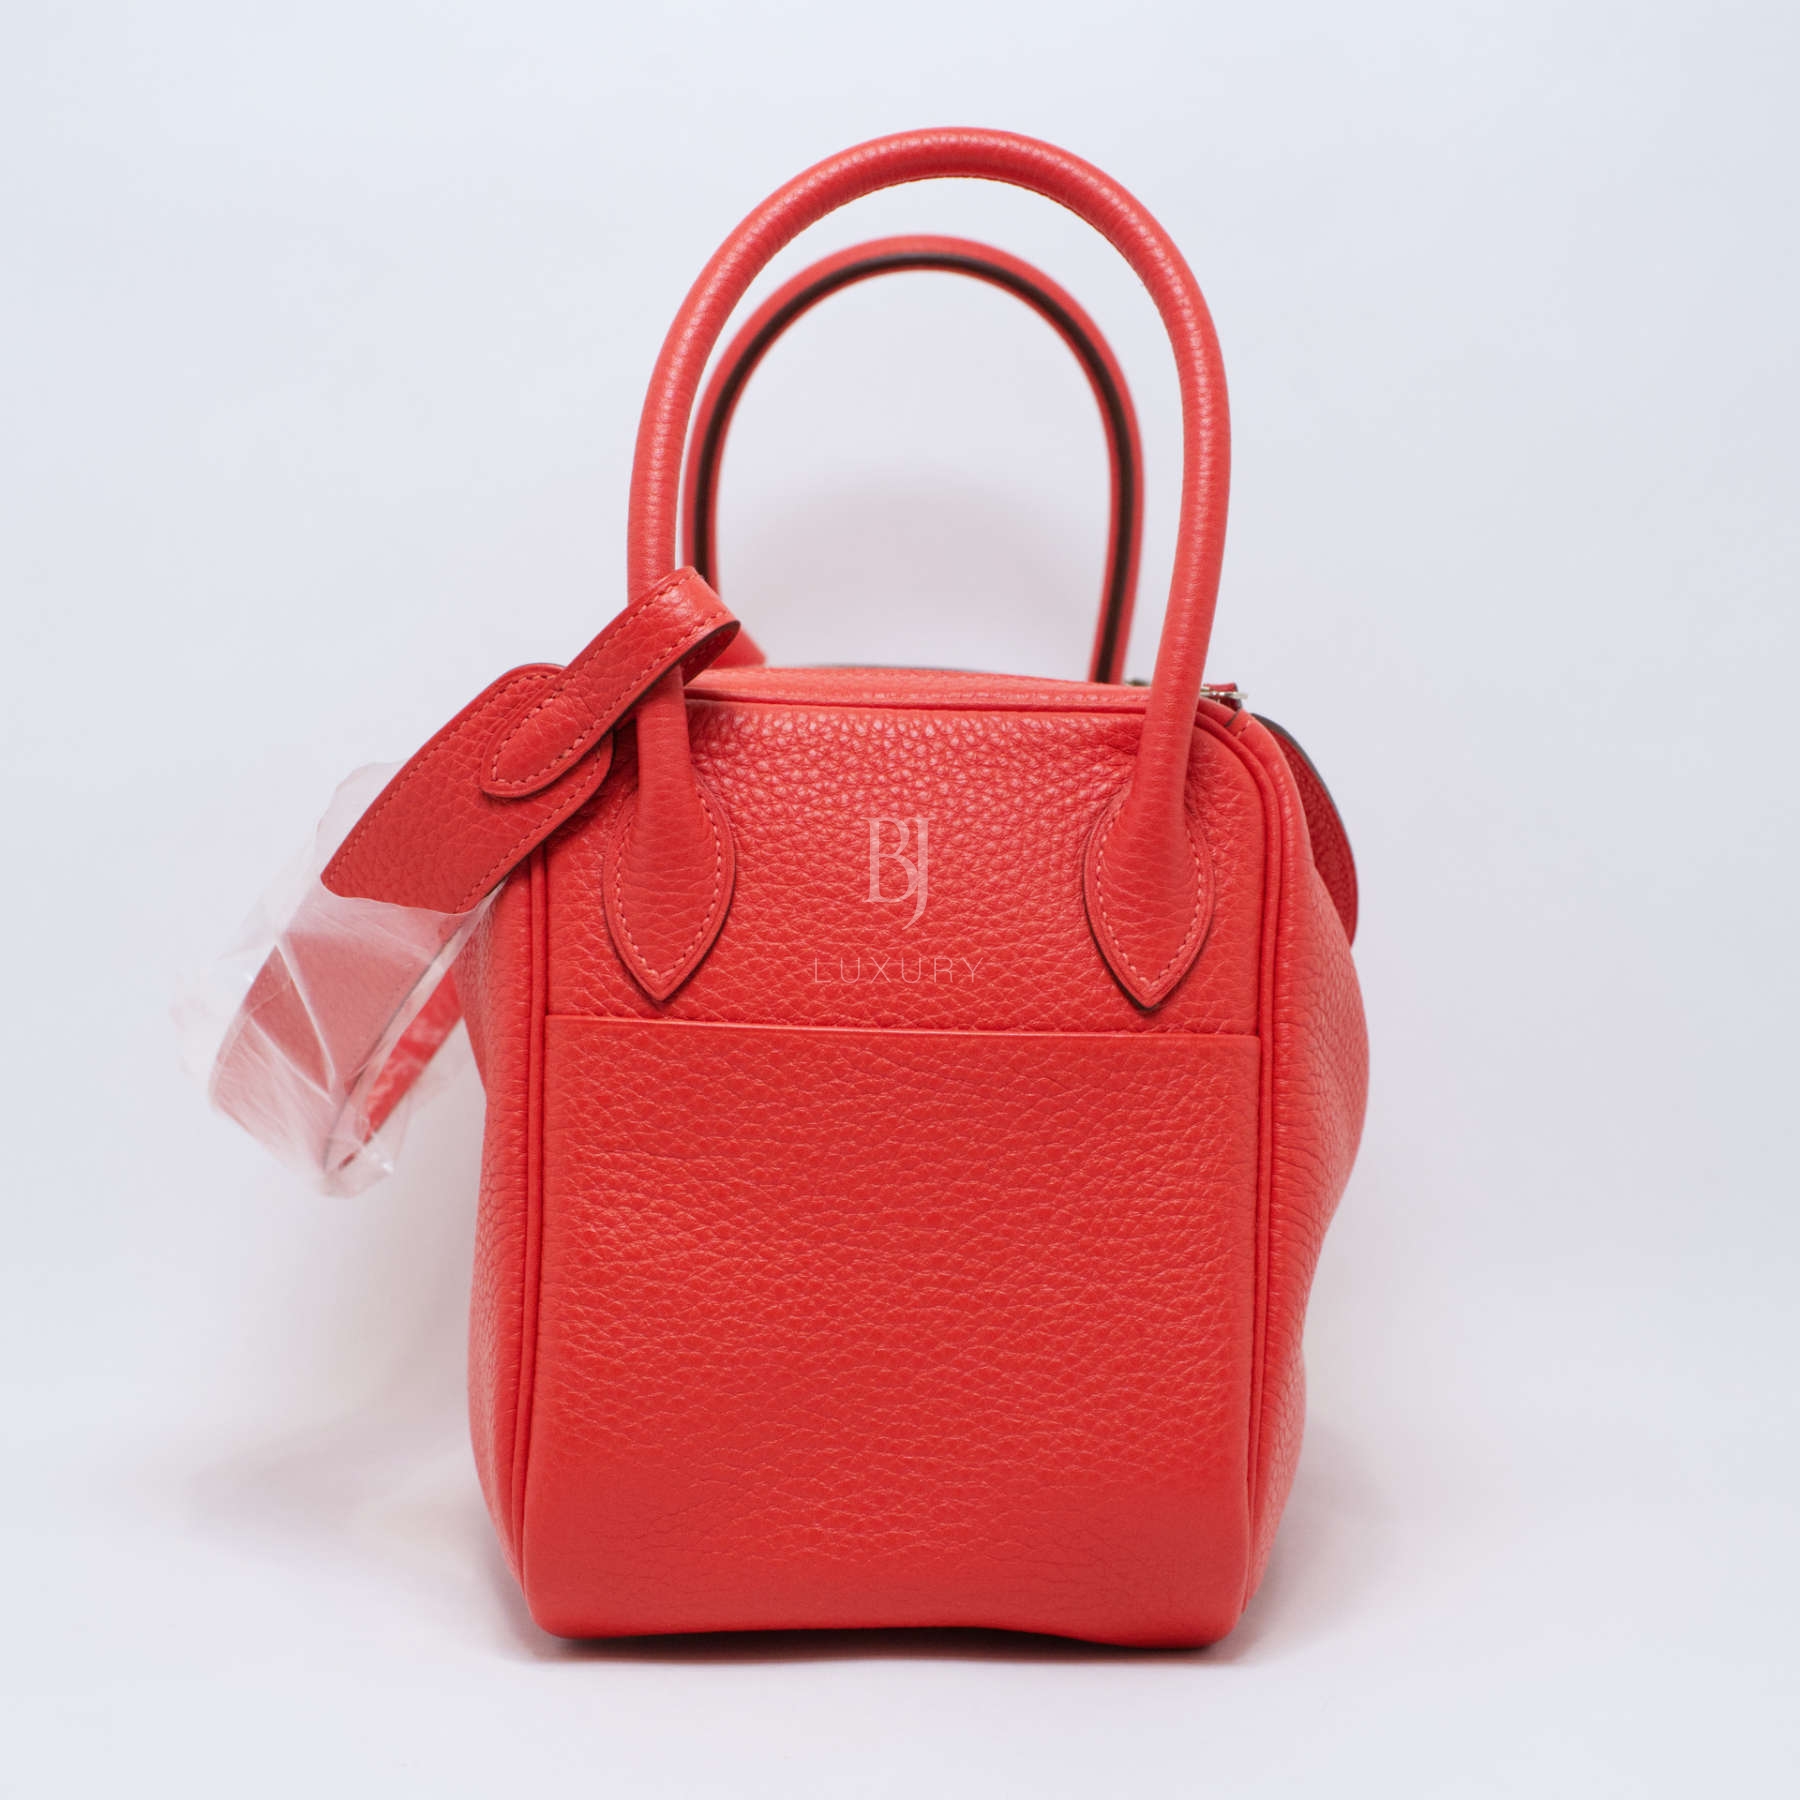 HERMES-LINDY-26-ROUGETOMATE-CLEMENCE-4812 side1.jpg